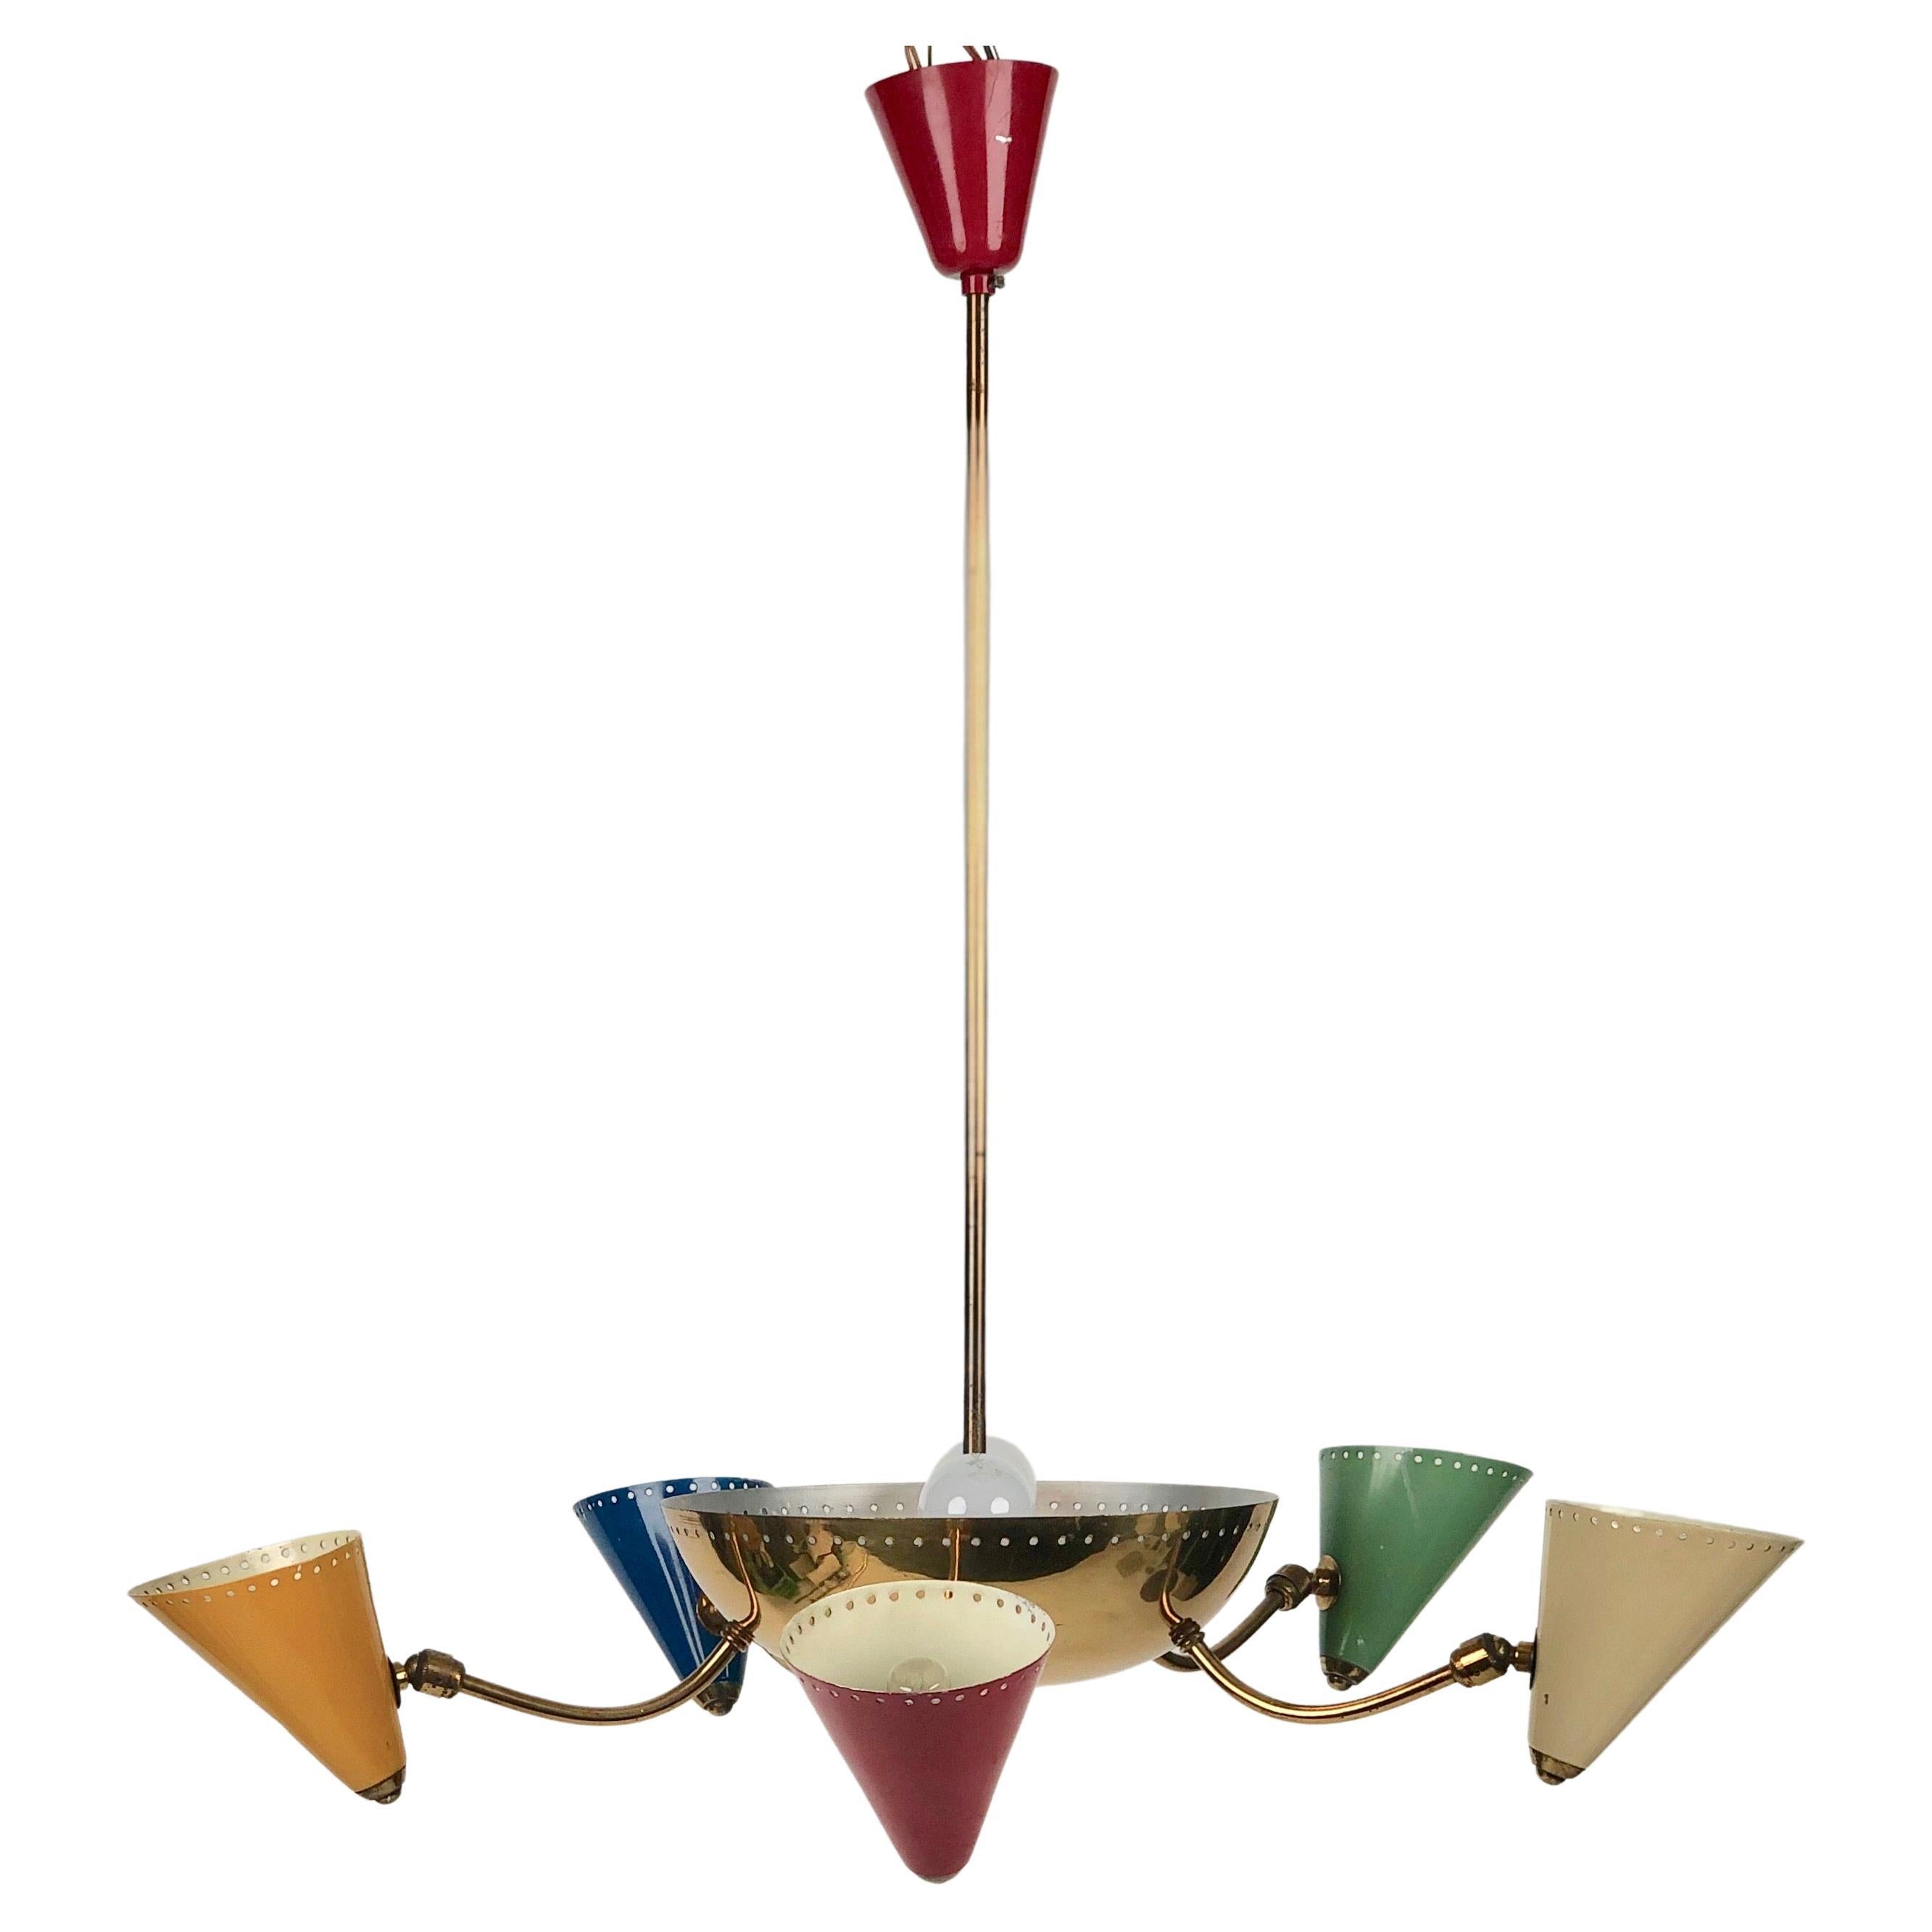 Italian Chandelier in Brass and Enamel Colour Cones, 1950 s, Italy